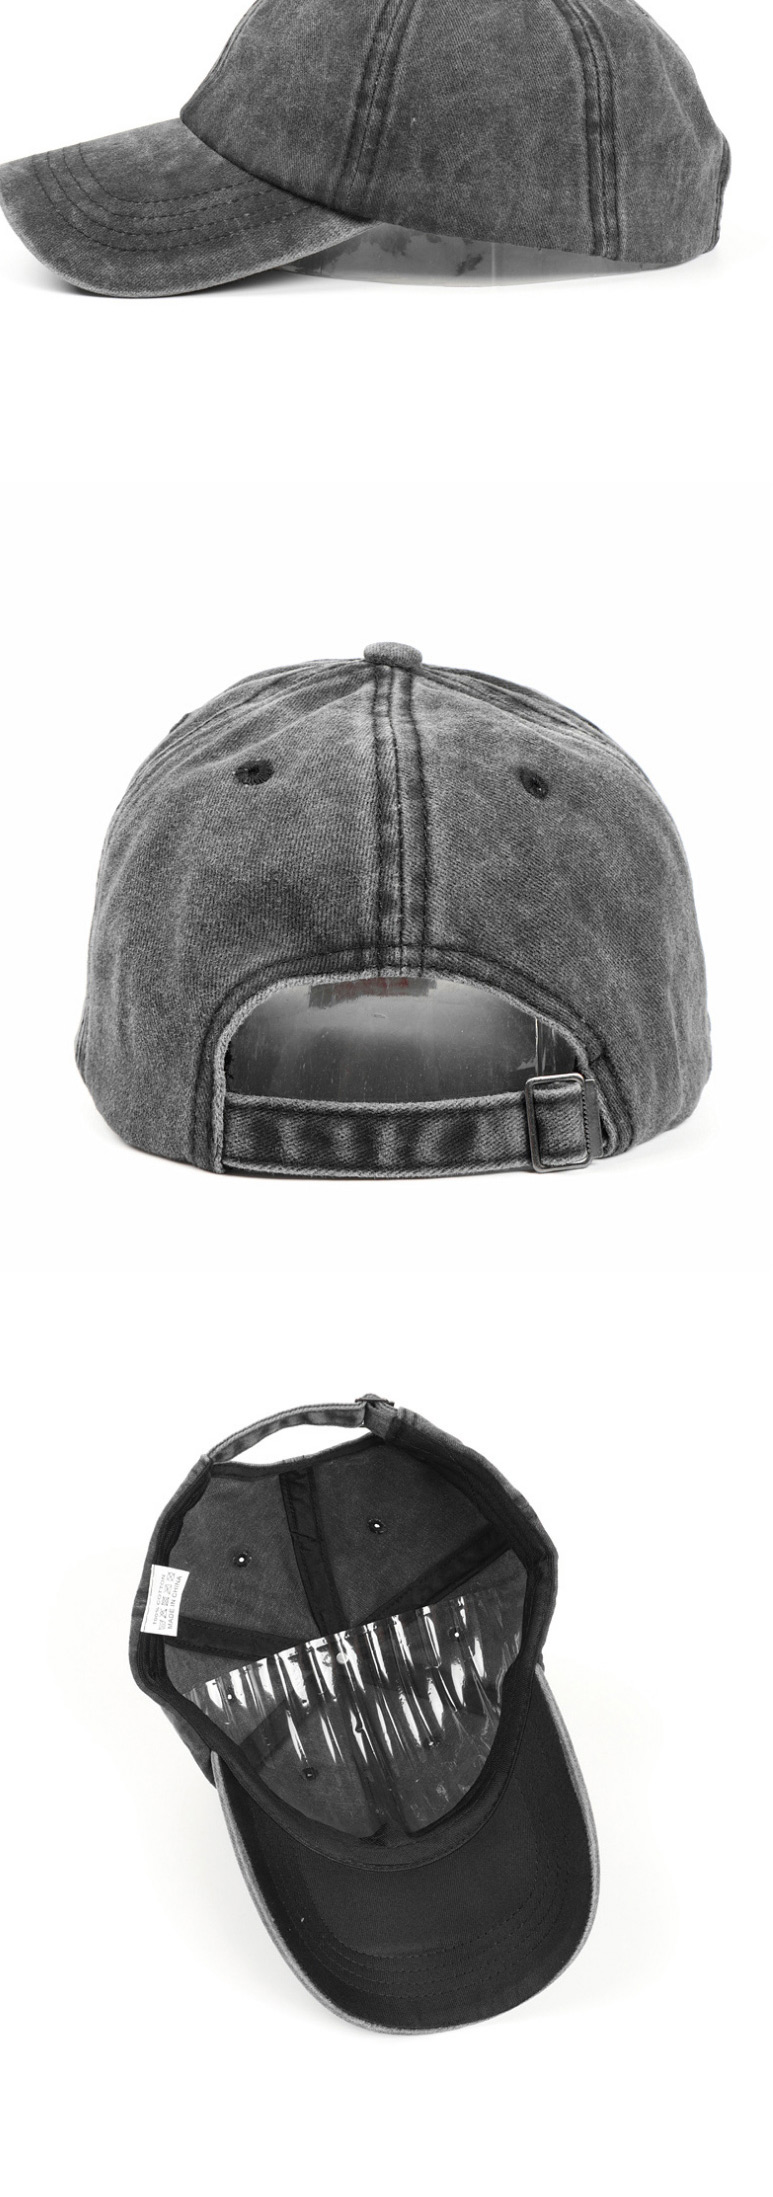 Fashion Ginger Washed Distressed Denim Soft Top And Curved Brim Cap,Baseball Caps